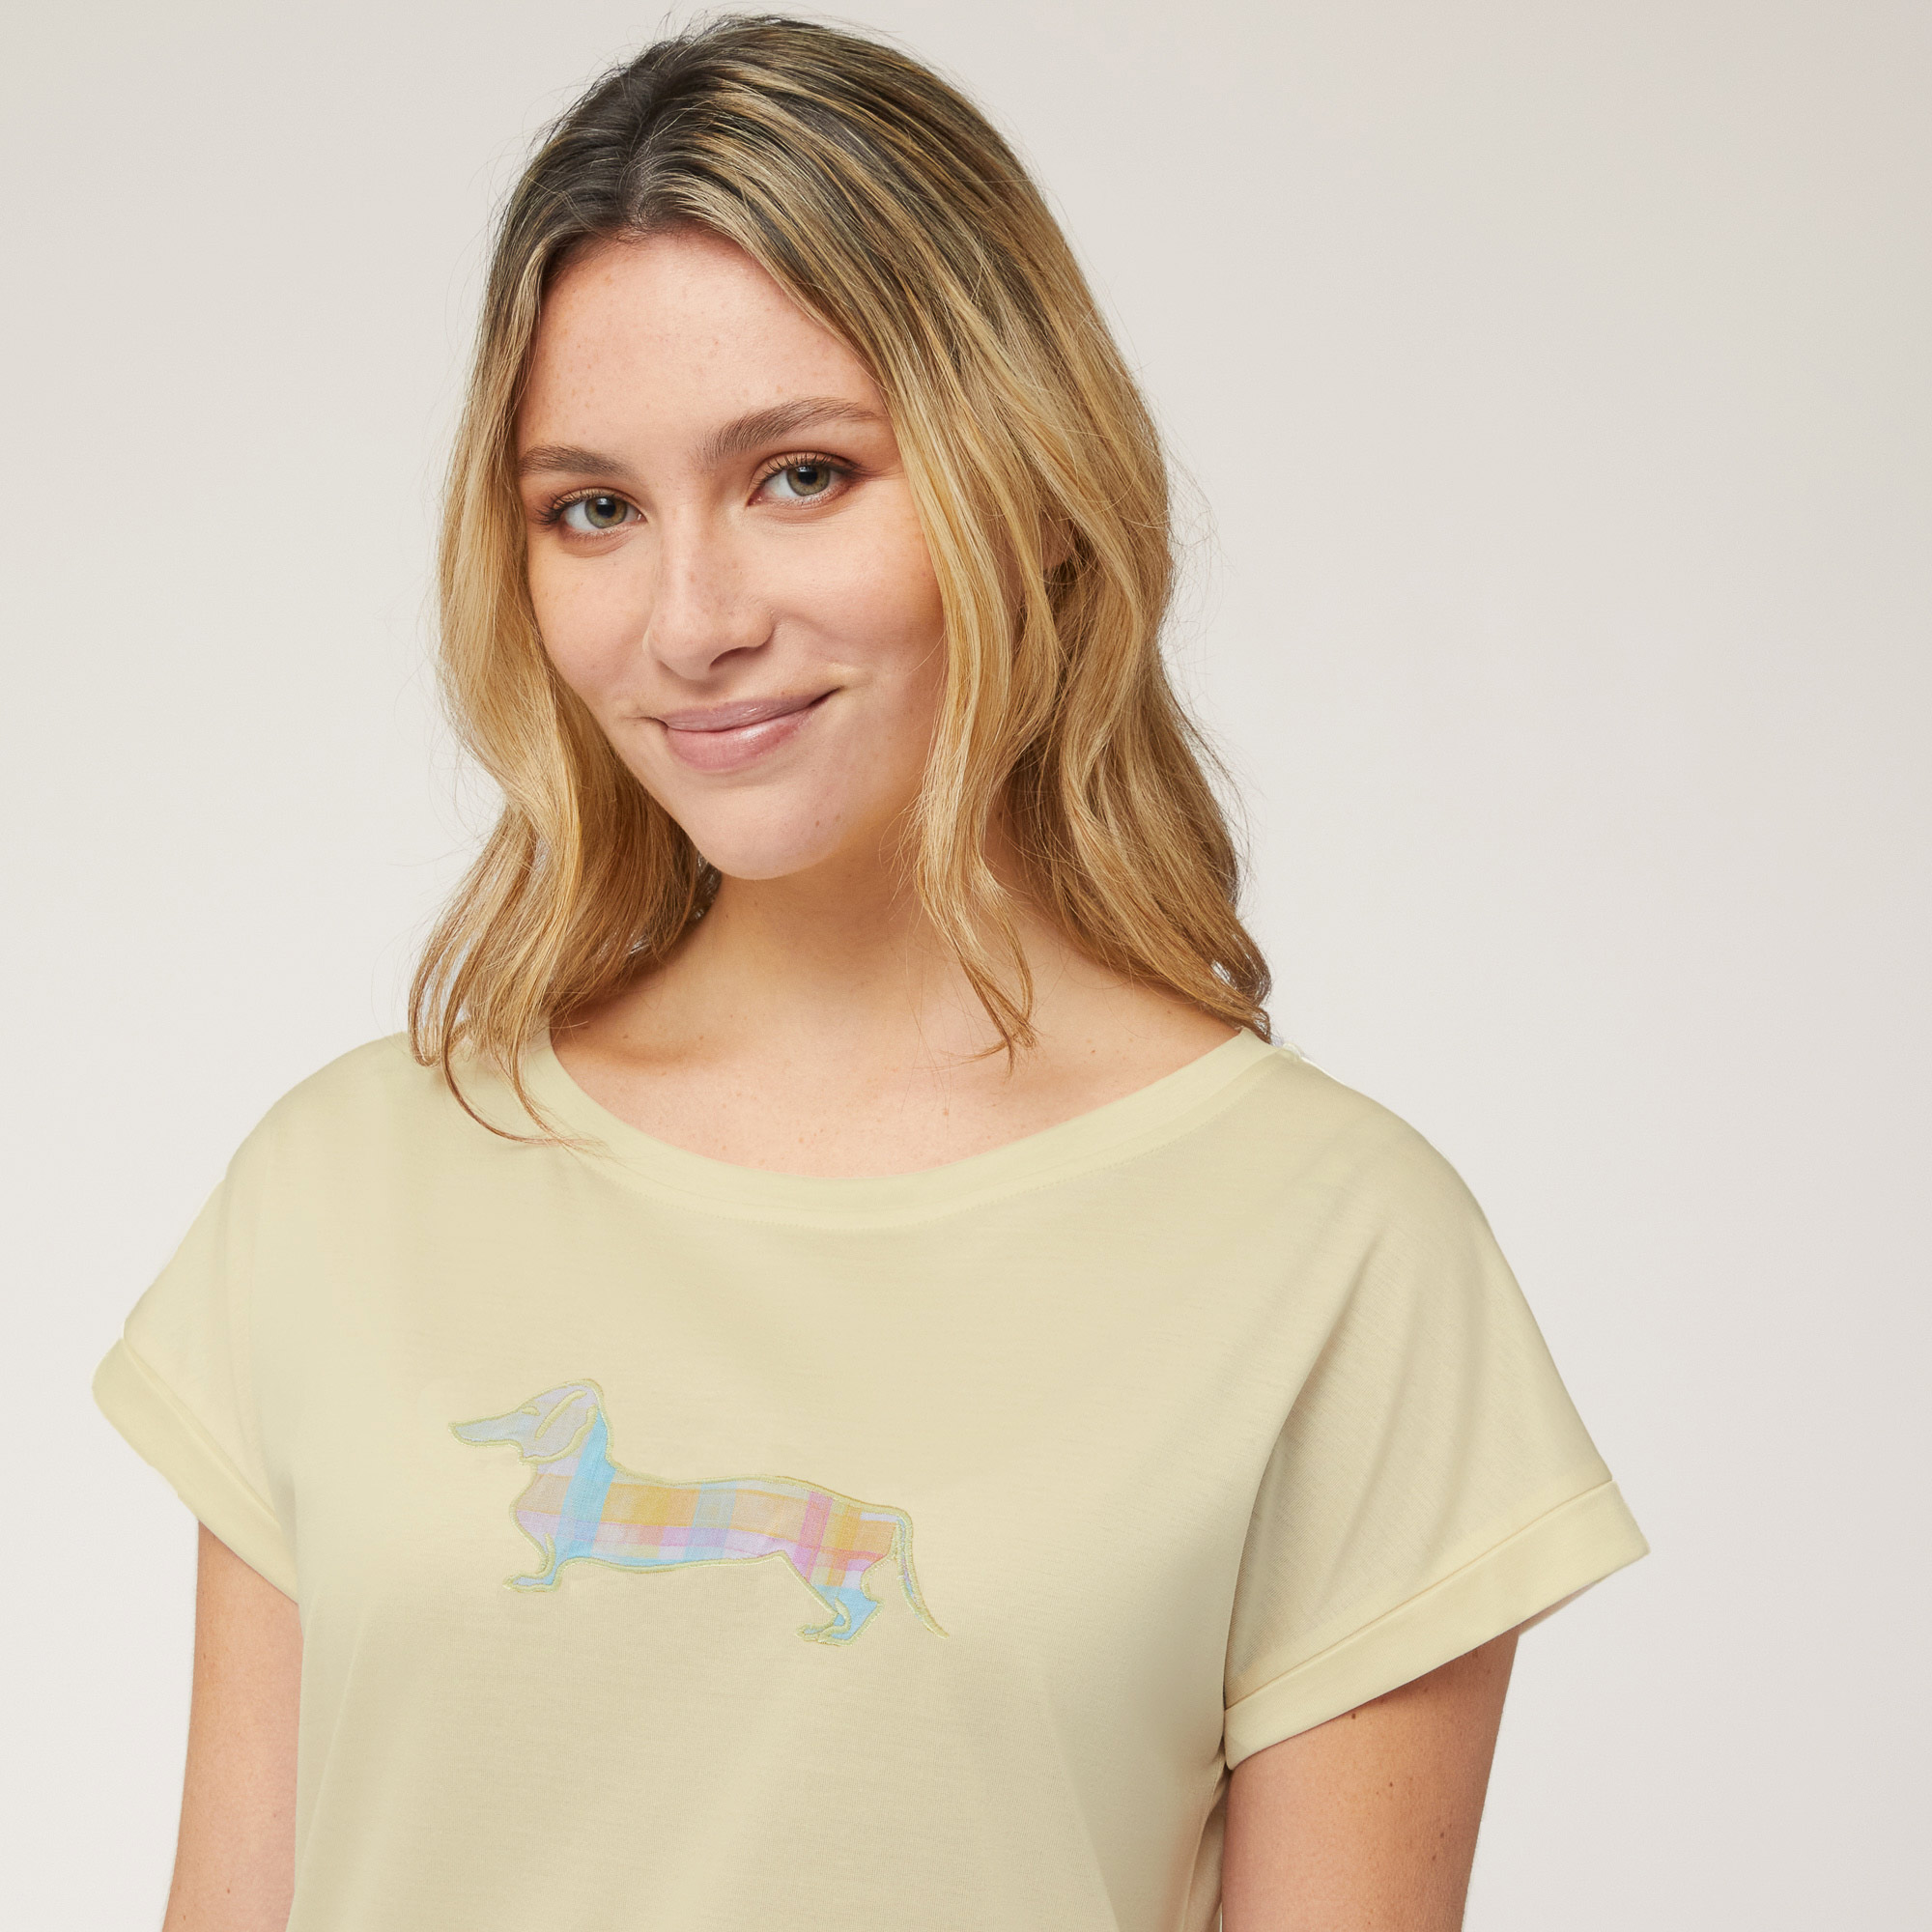 Cotton T-Shirt with Dachshund, Light Yellow, large